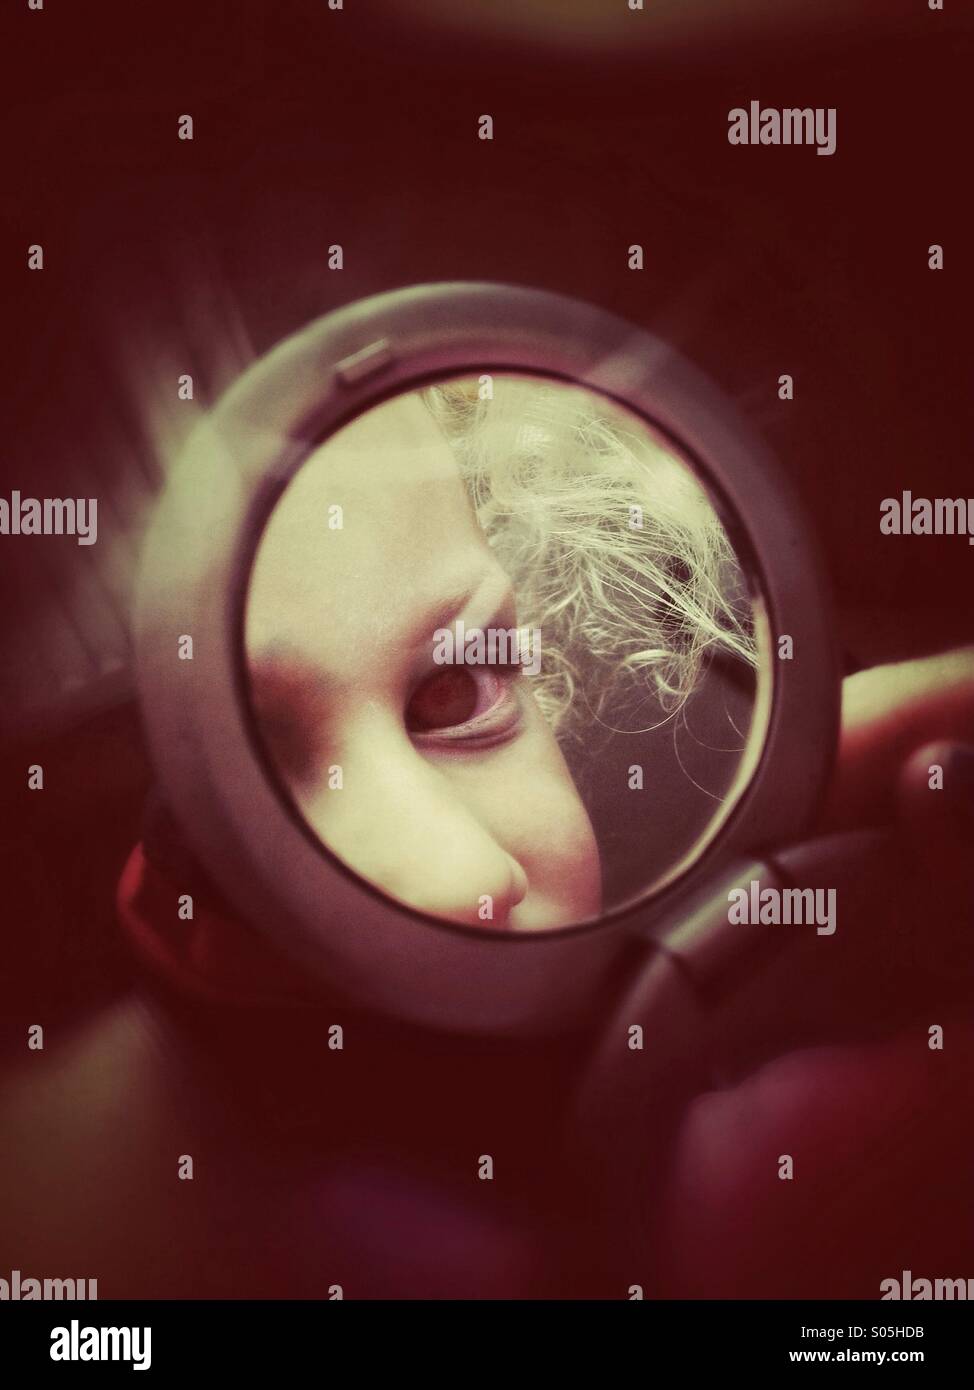 Young girl looking at herself in hand mirror Stock Photo